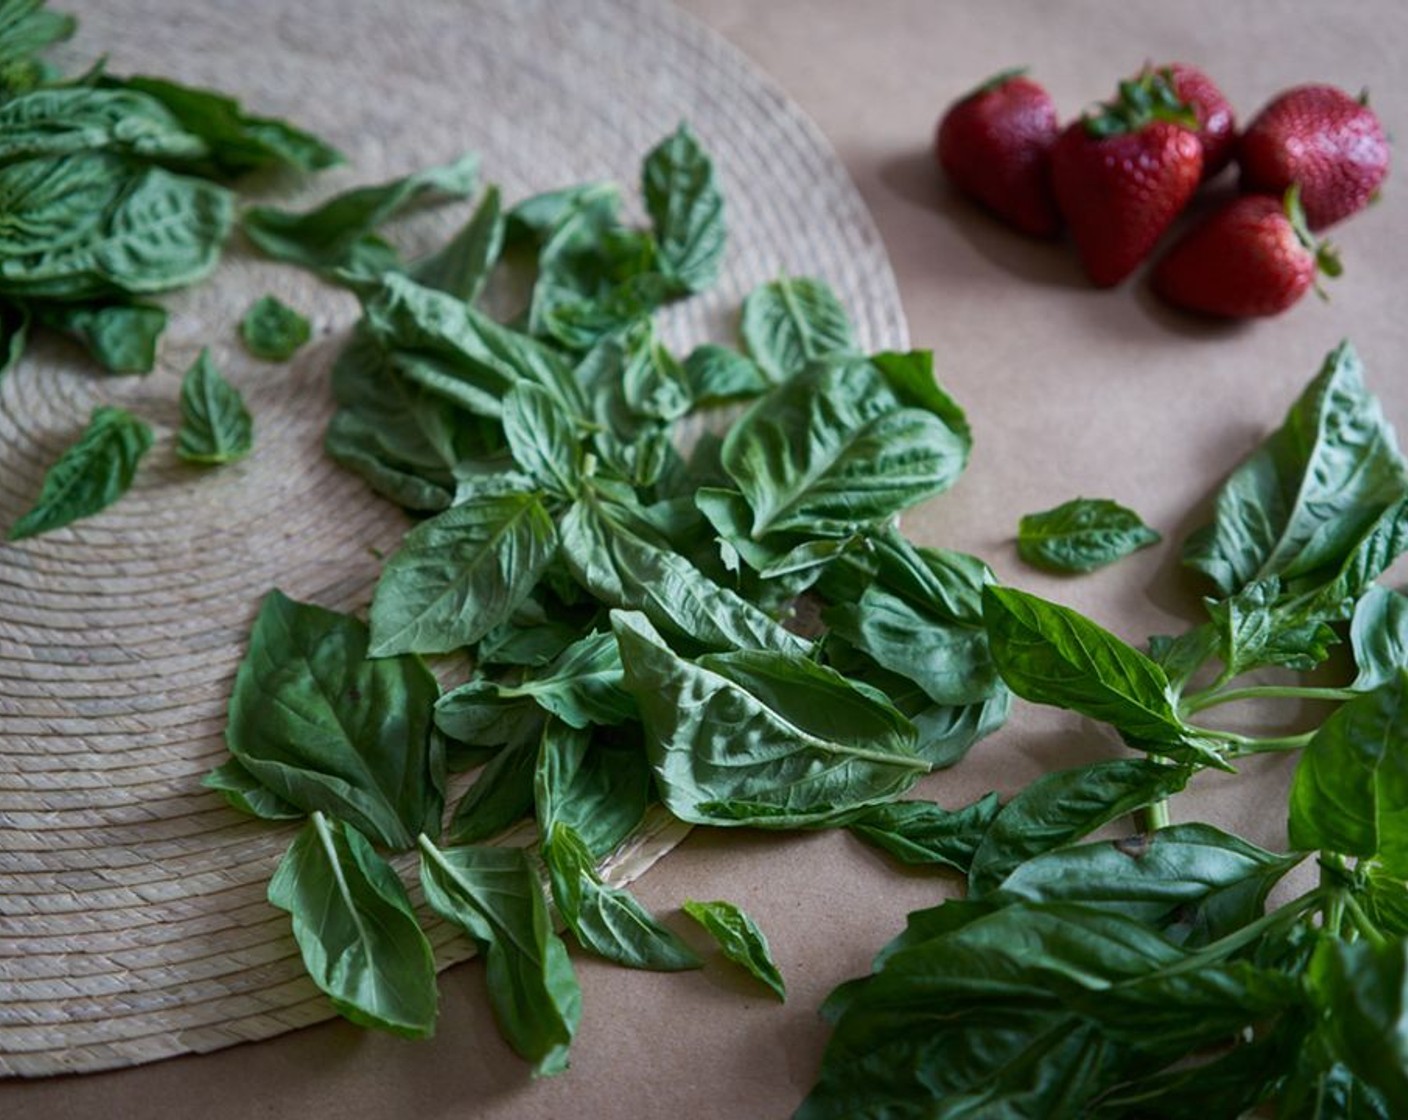 step 3 Place Arugula (5 2/3 cups) in a large bowl. Tear the Fresh Basil (1 cup) and Fresh Mint (1/2 cup) into smaller pieces (small leaves can remain whole). Toss herbs and arugula gently together with your hands.